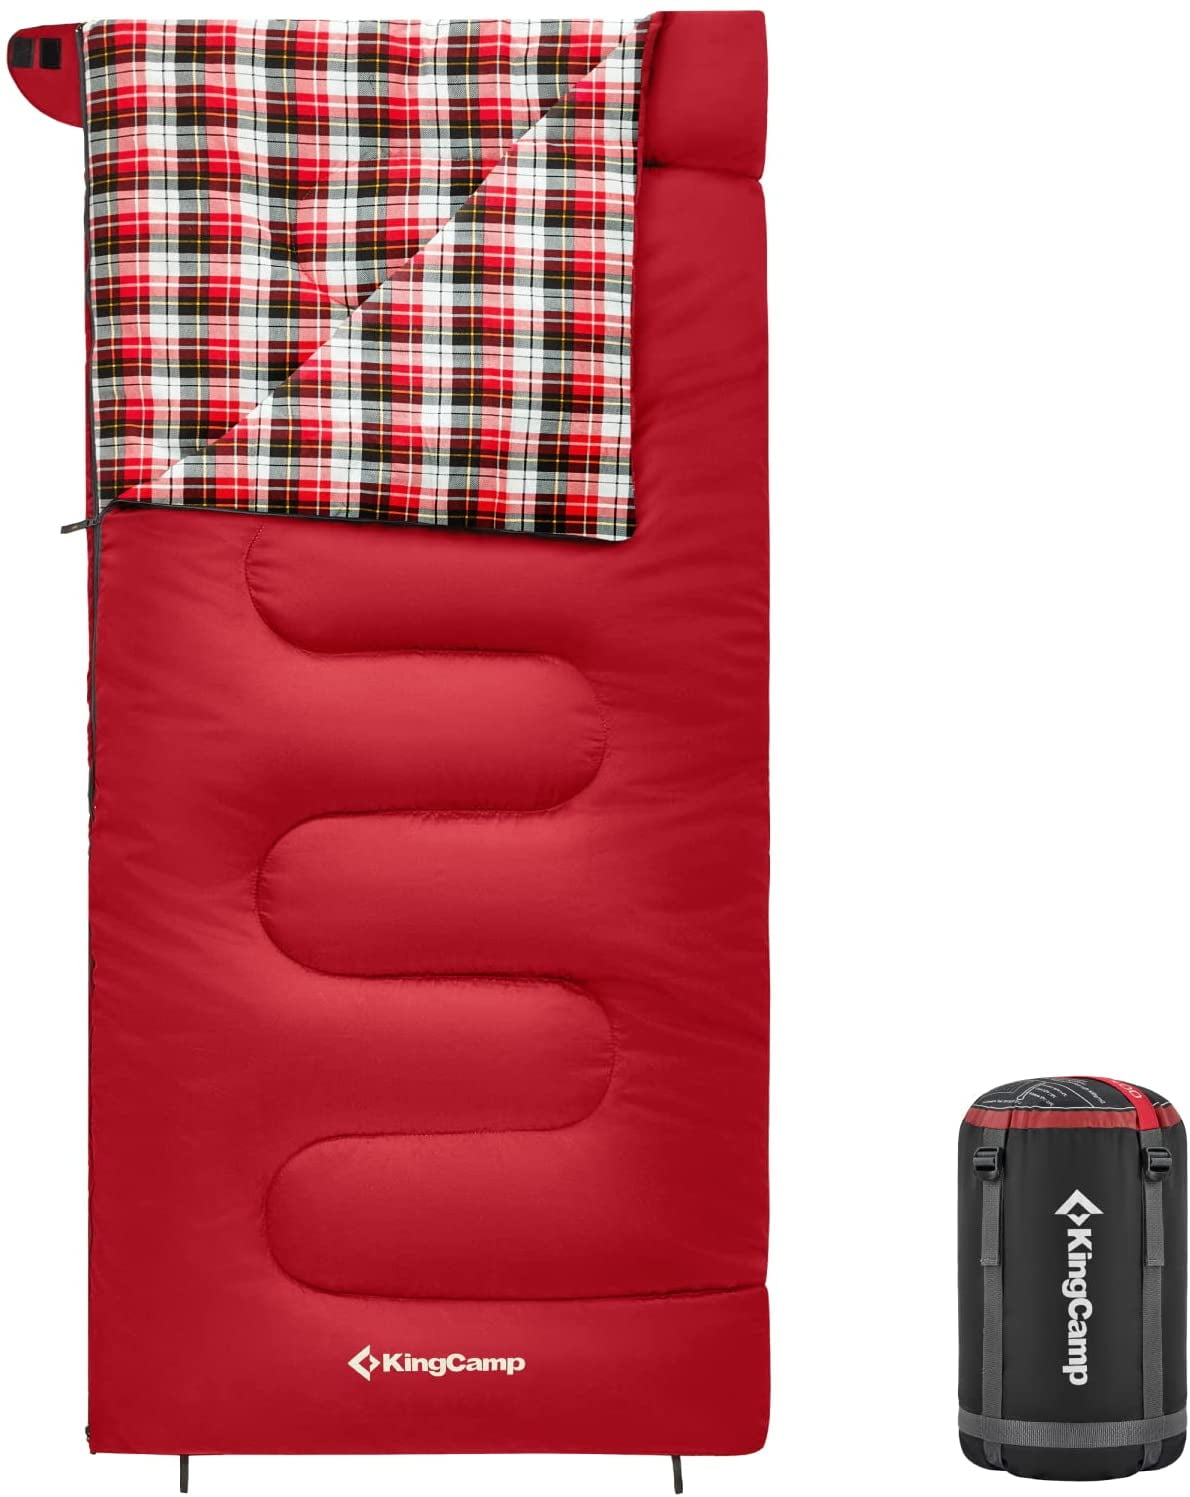 KingCamp Camping Sleeping Bag Cotton Flannel Cold Weather Sleeping